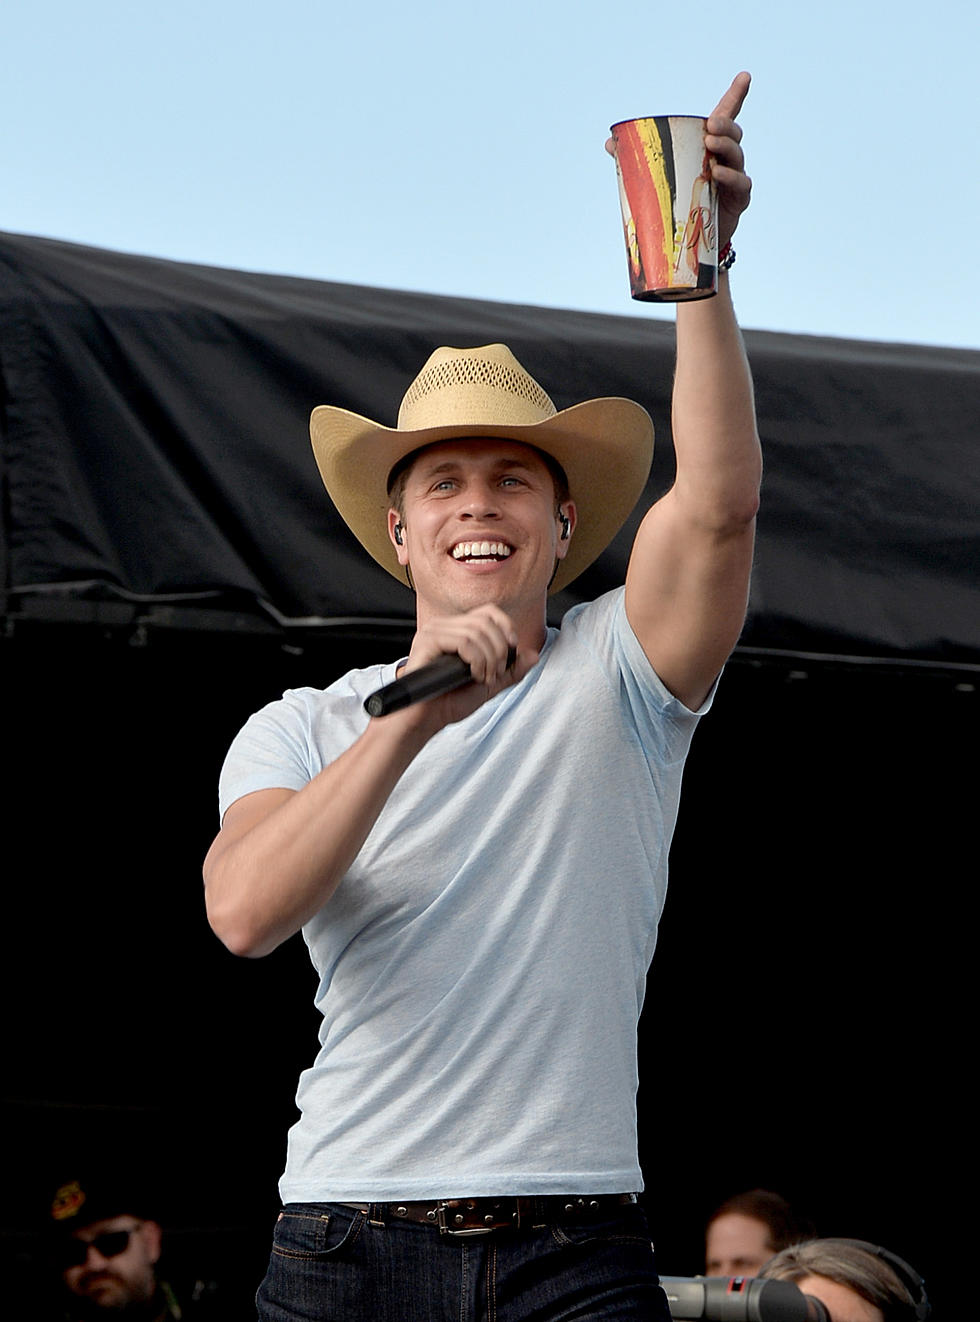 Watch Dustin Lynch’s “Where It’s At” + Christmas Tour